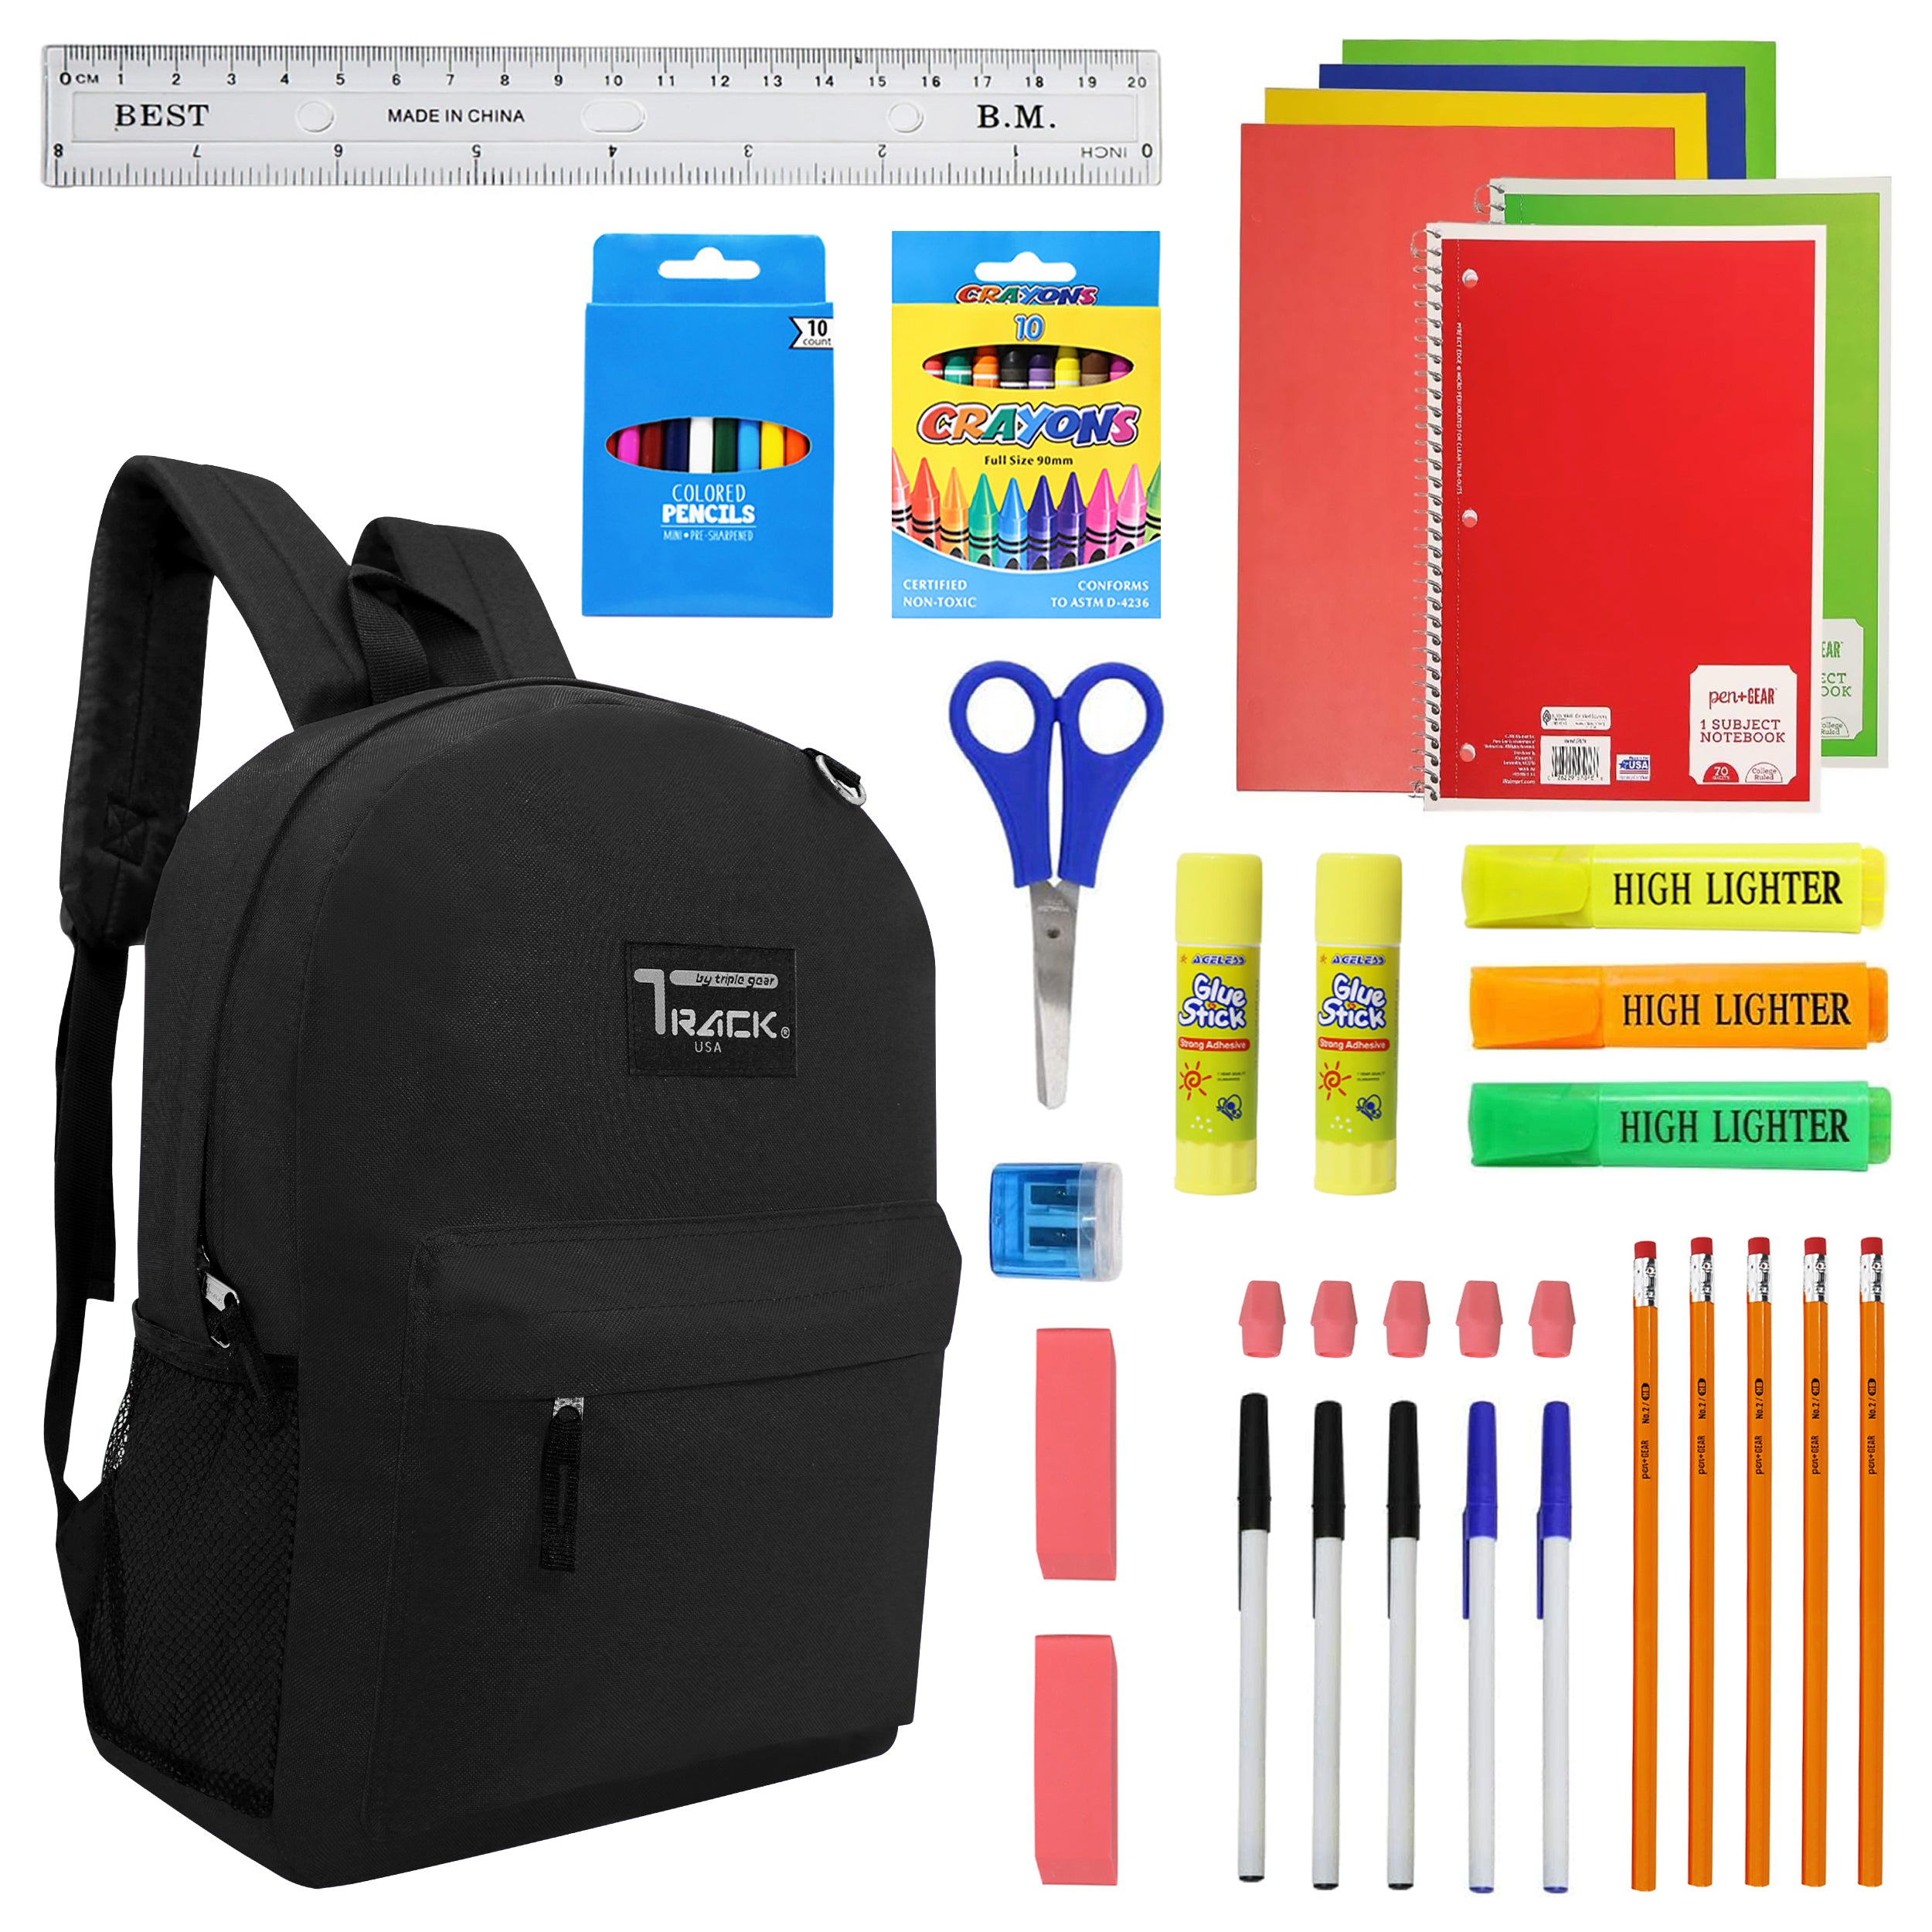 17 Inch Bulk Backpacks in Assorted Colors with School Supply Kits wholesale - Case of 12